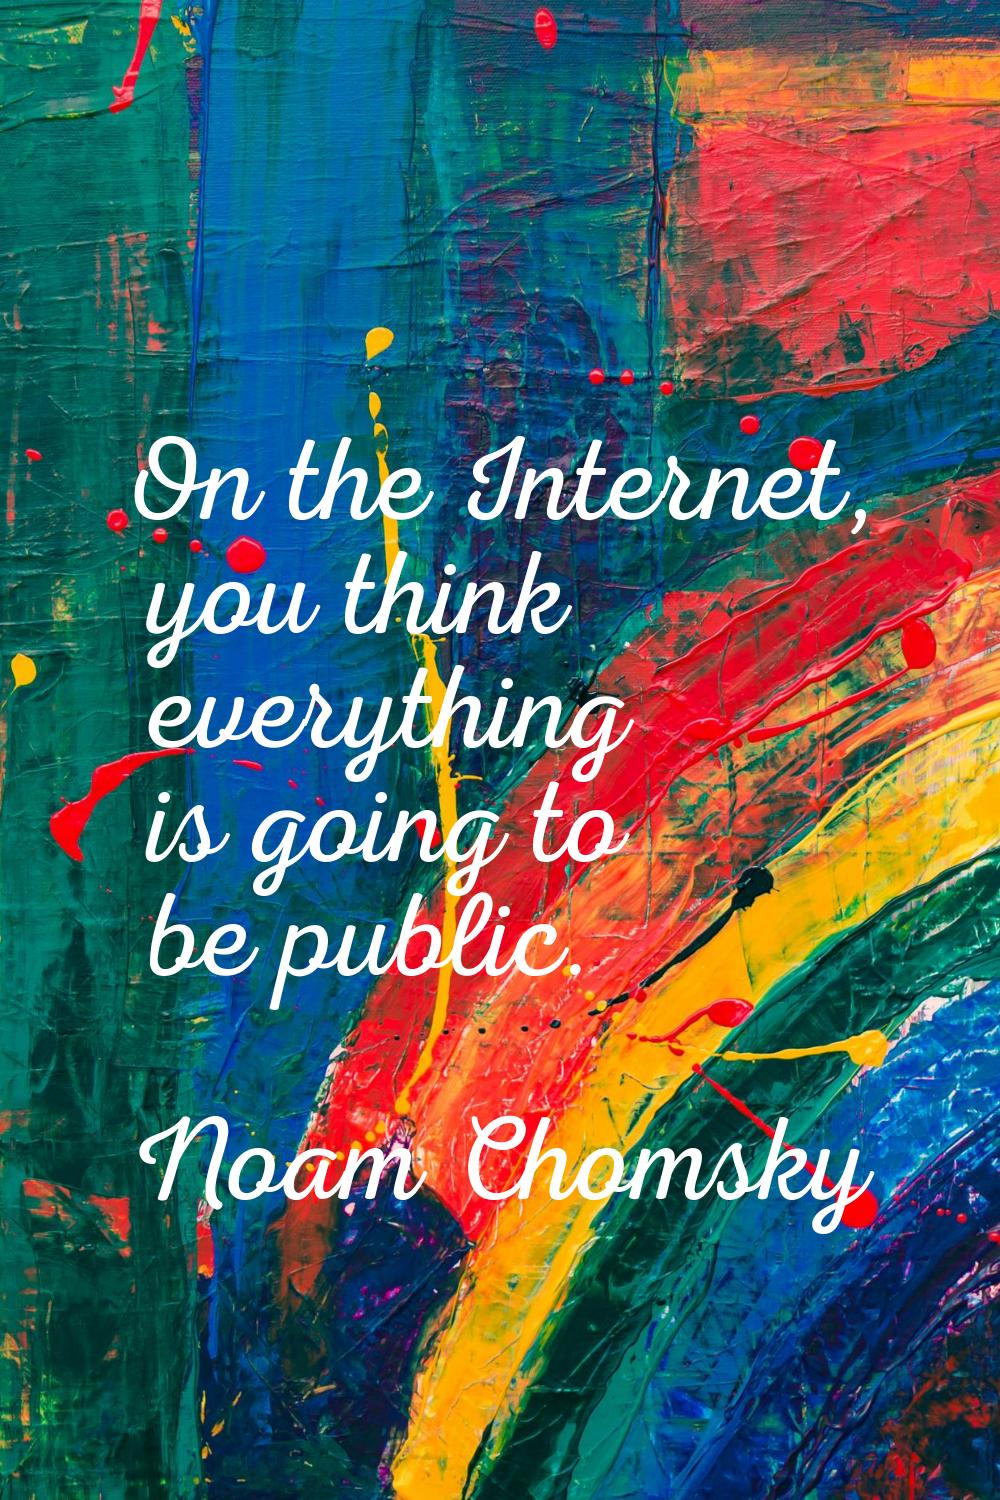 On the Internet, you think everything is going to be public.